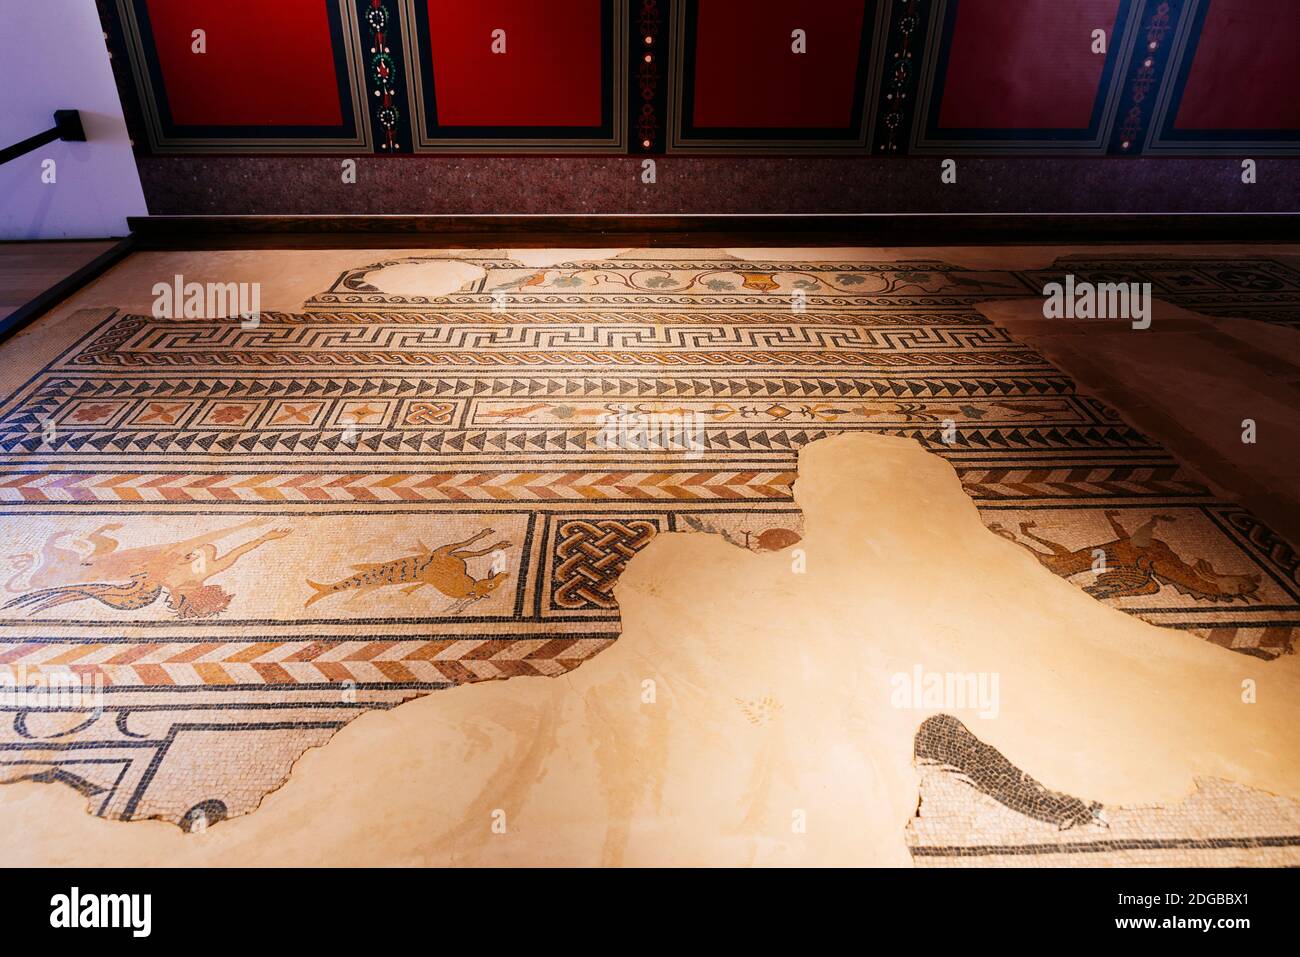 Mosaic of San Gil, exposed in one of the rooms of the Ducal Palace, dates from the 2nd century. Ducal Palace - Palacio Ducal. Currently multidisciplin Stock Photo